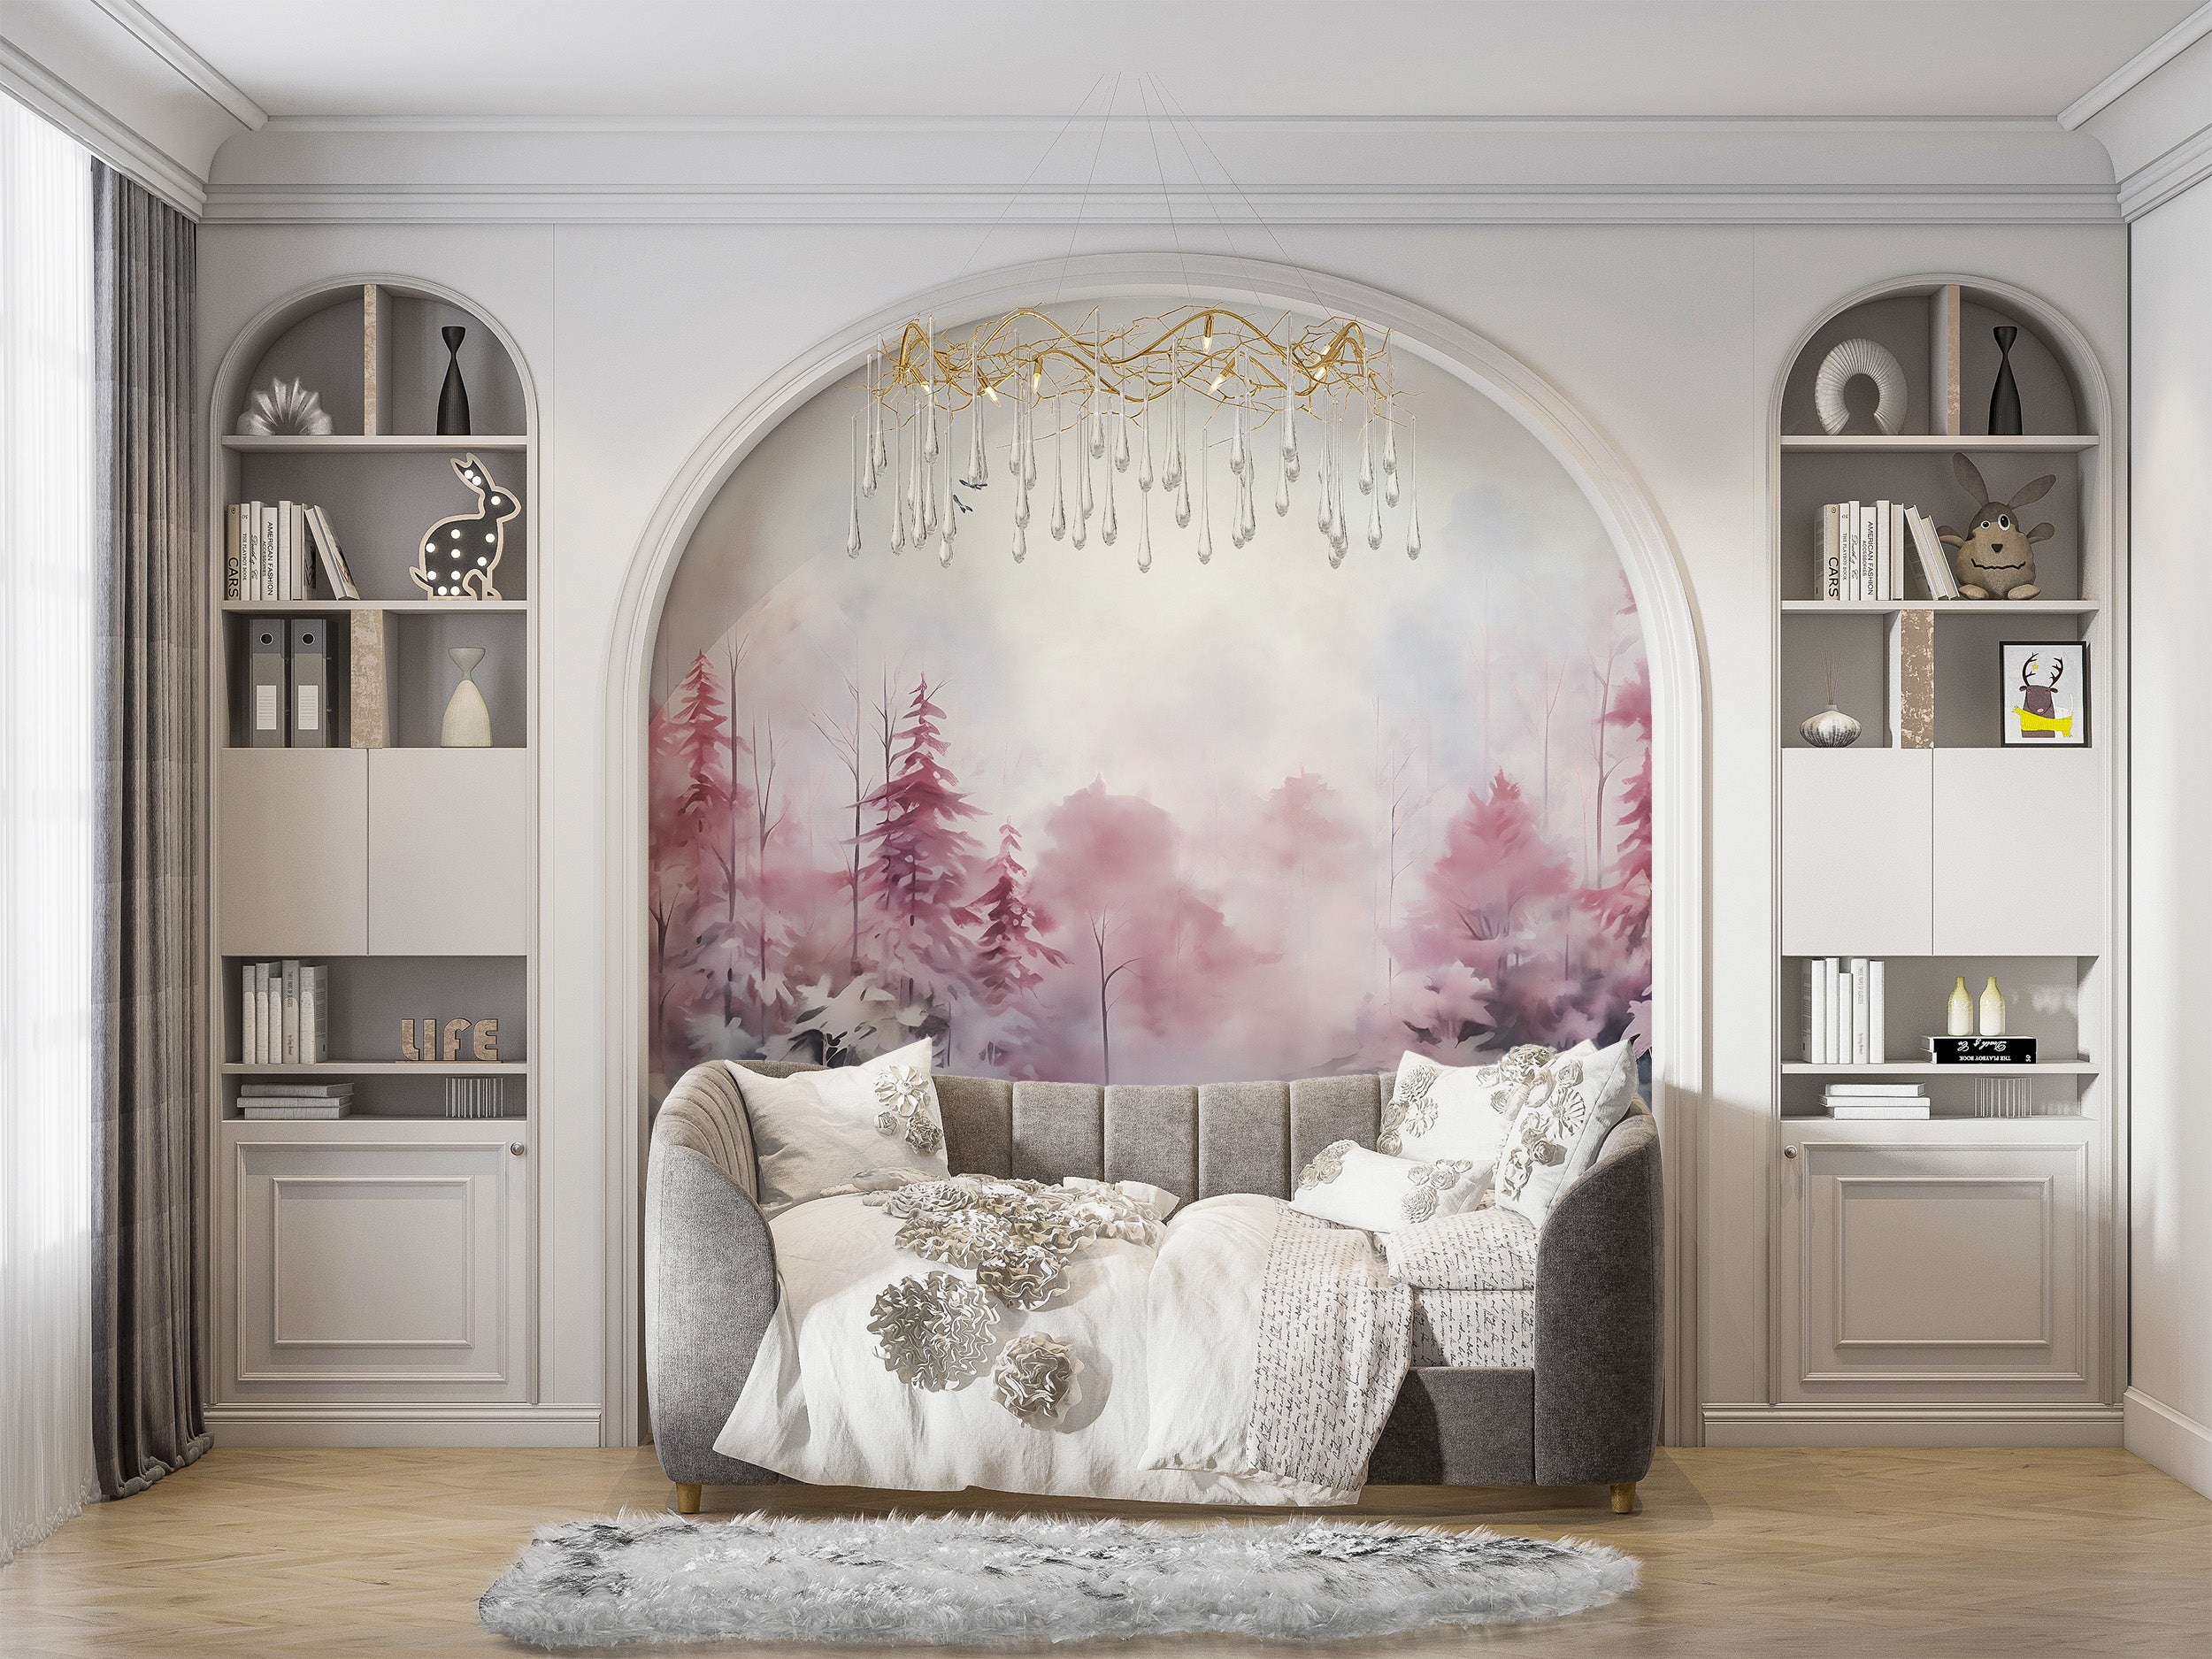 Captivating Nature-Inspired Wall Decor for Tranquil Ambiance